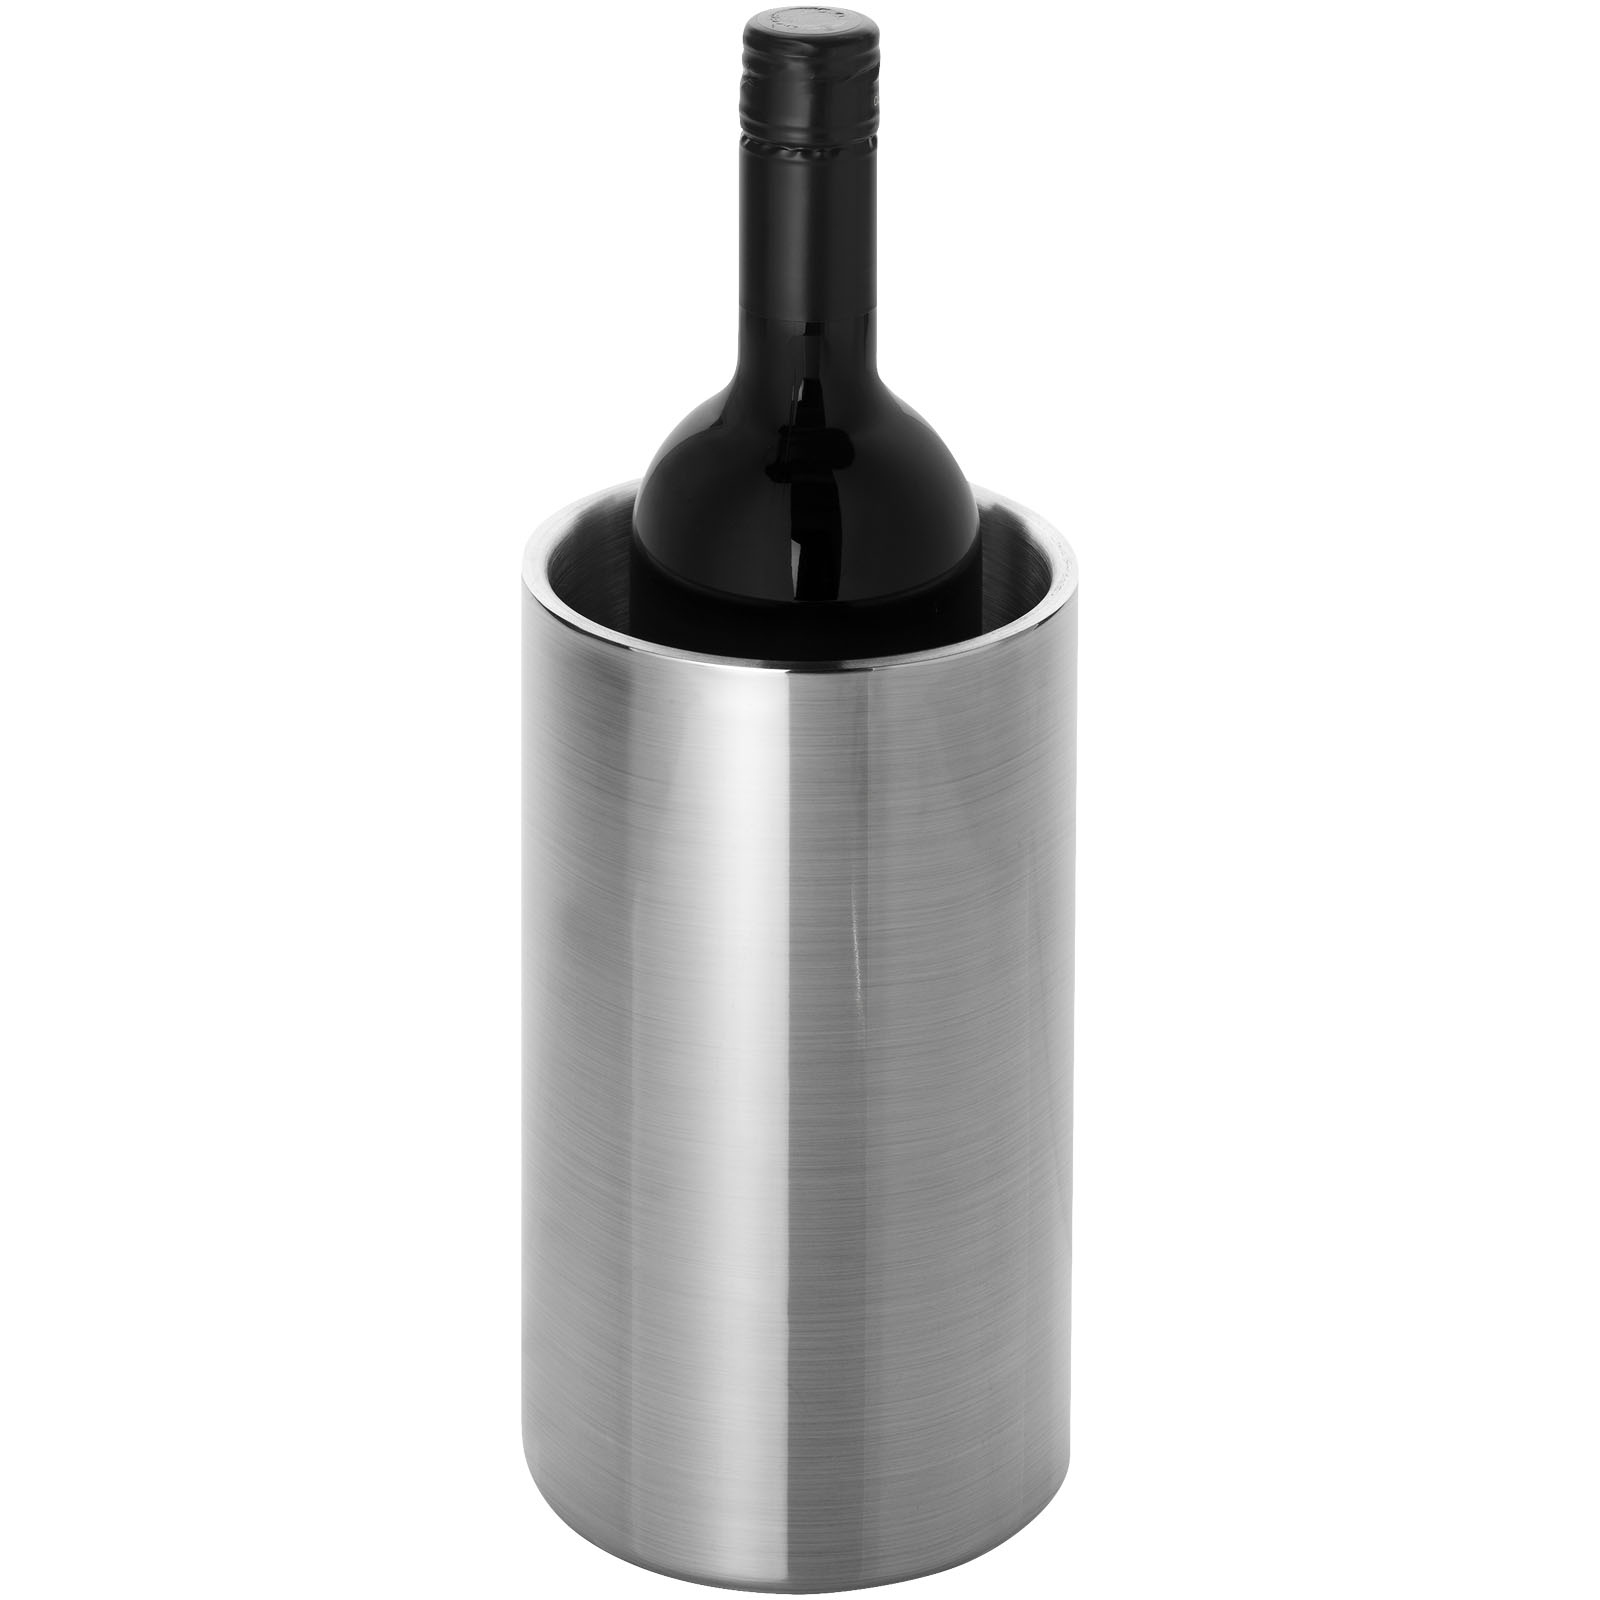 Stainless steel wine cooler MINT - silver